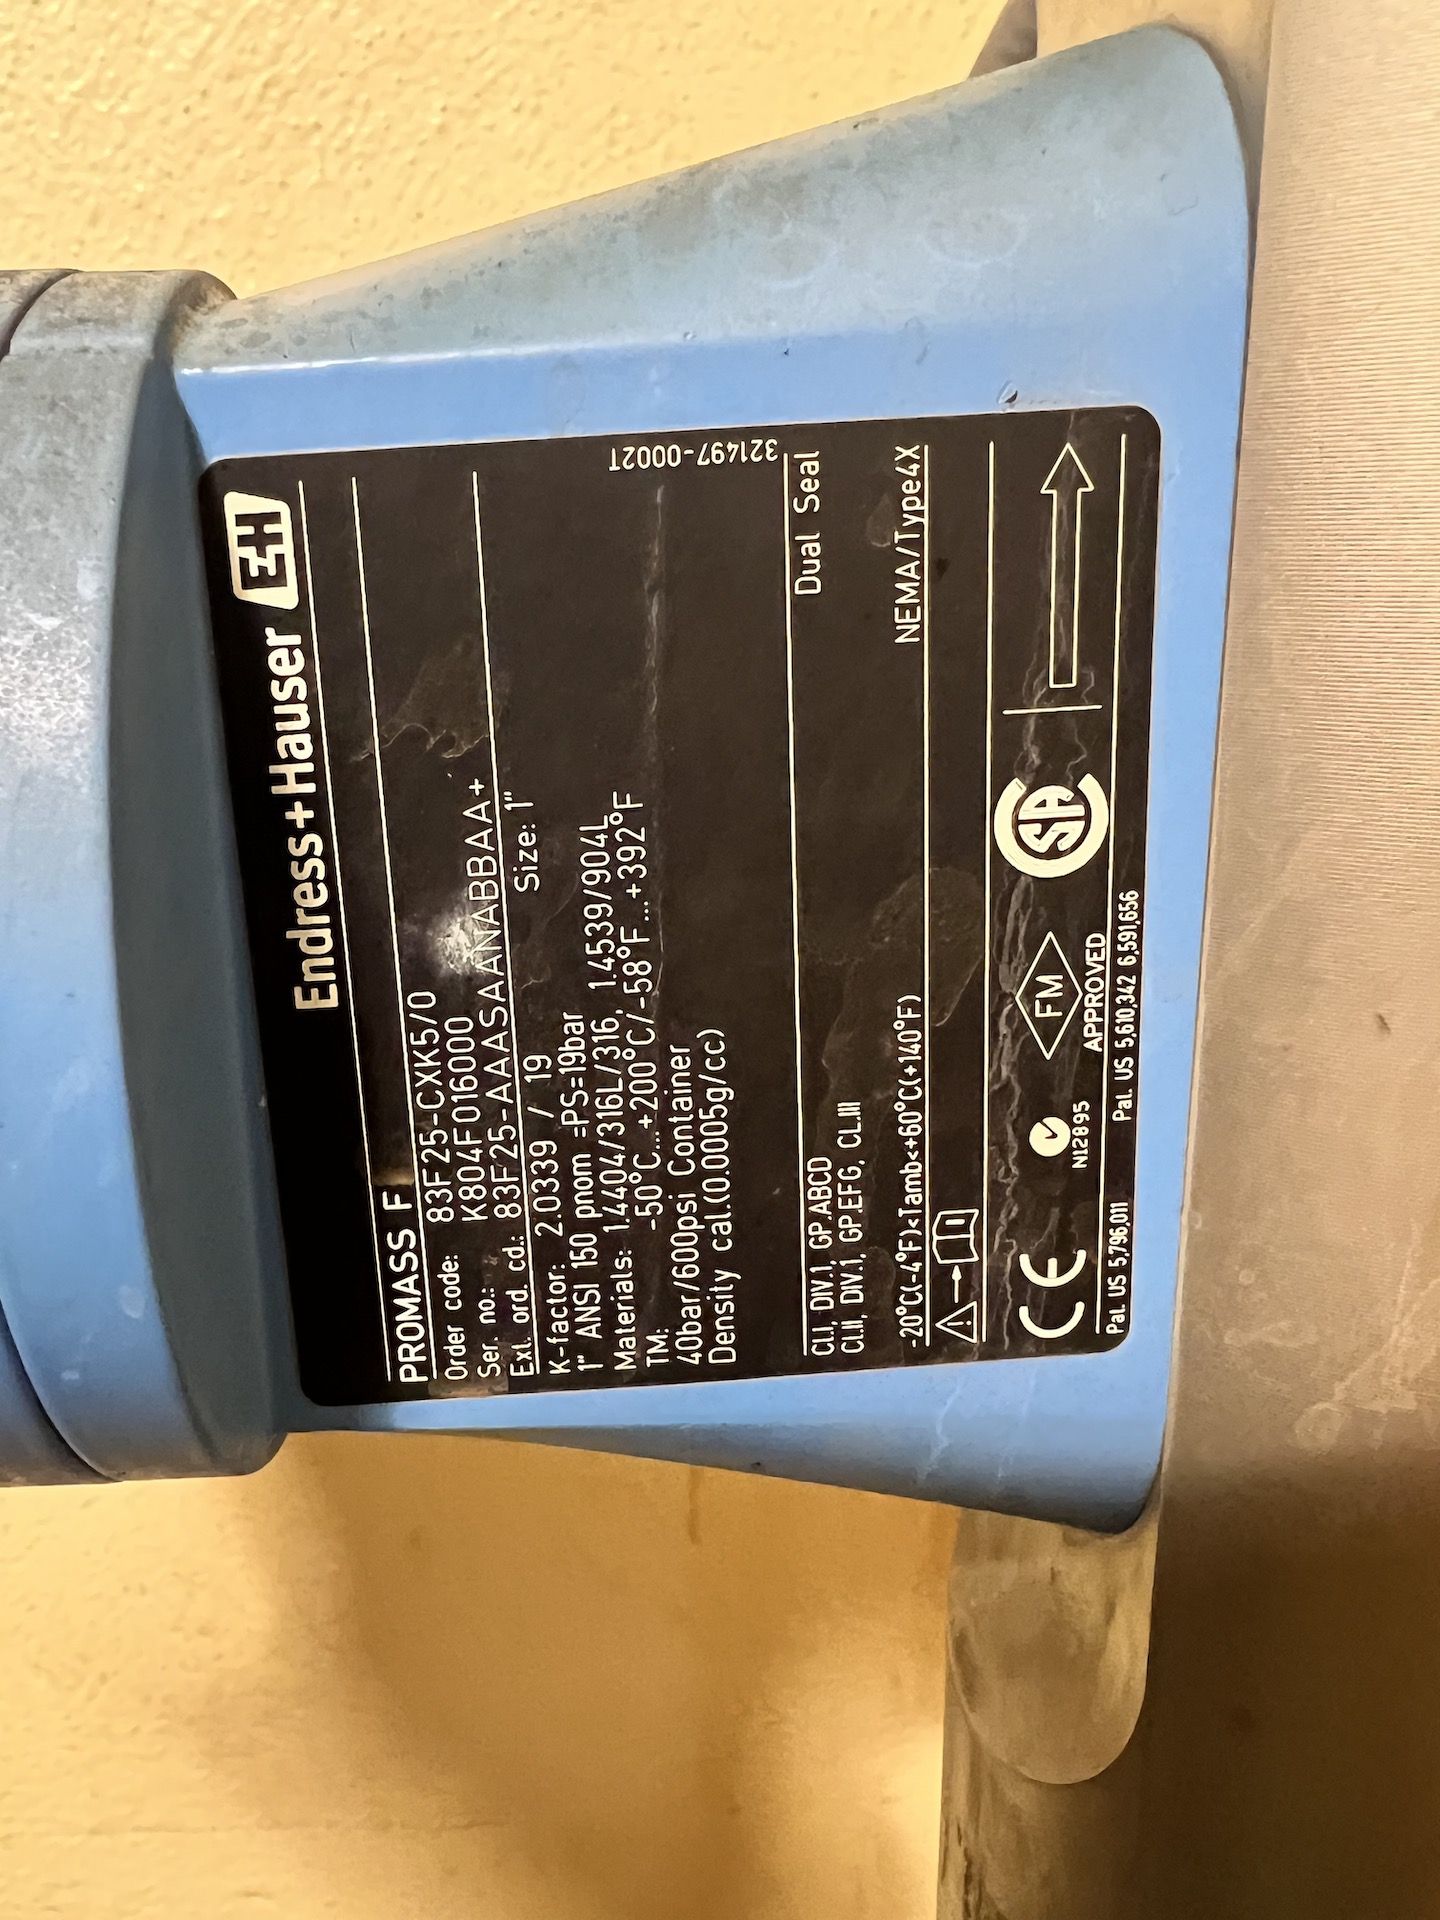 ENDRESS HAUSER PROMASS F FLOW METER WITH DIGITAL READOUT (SIMPLE LOADING FEE $110) - Image 3 of 6